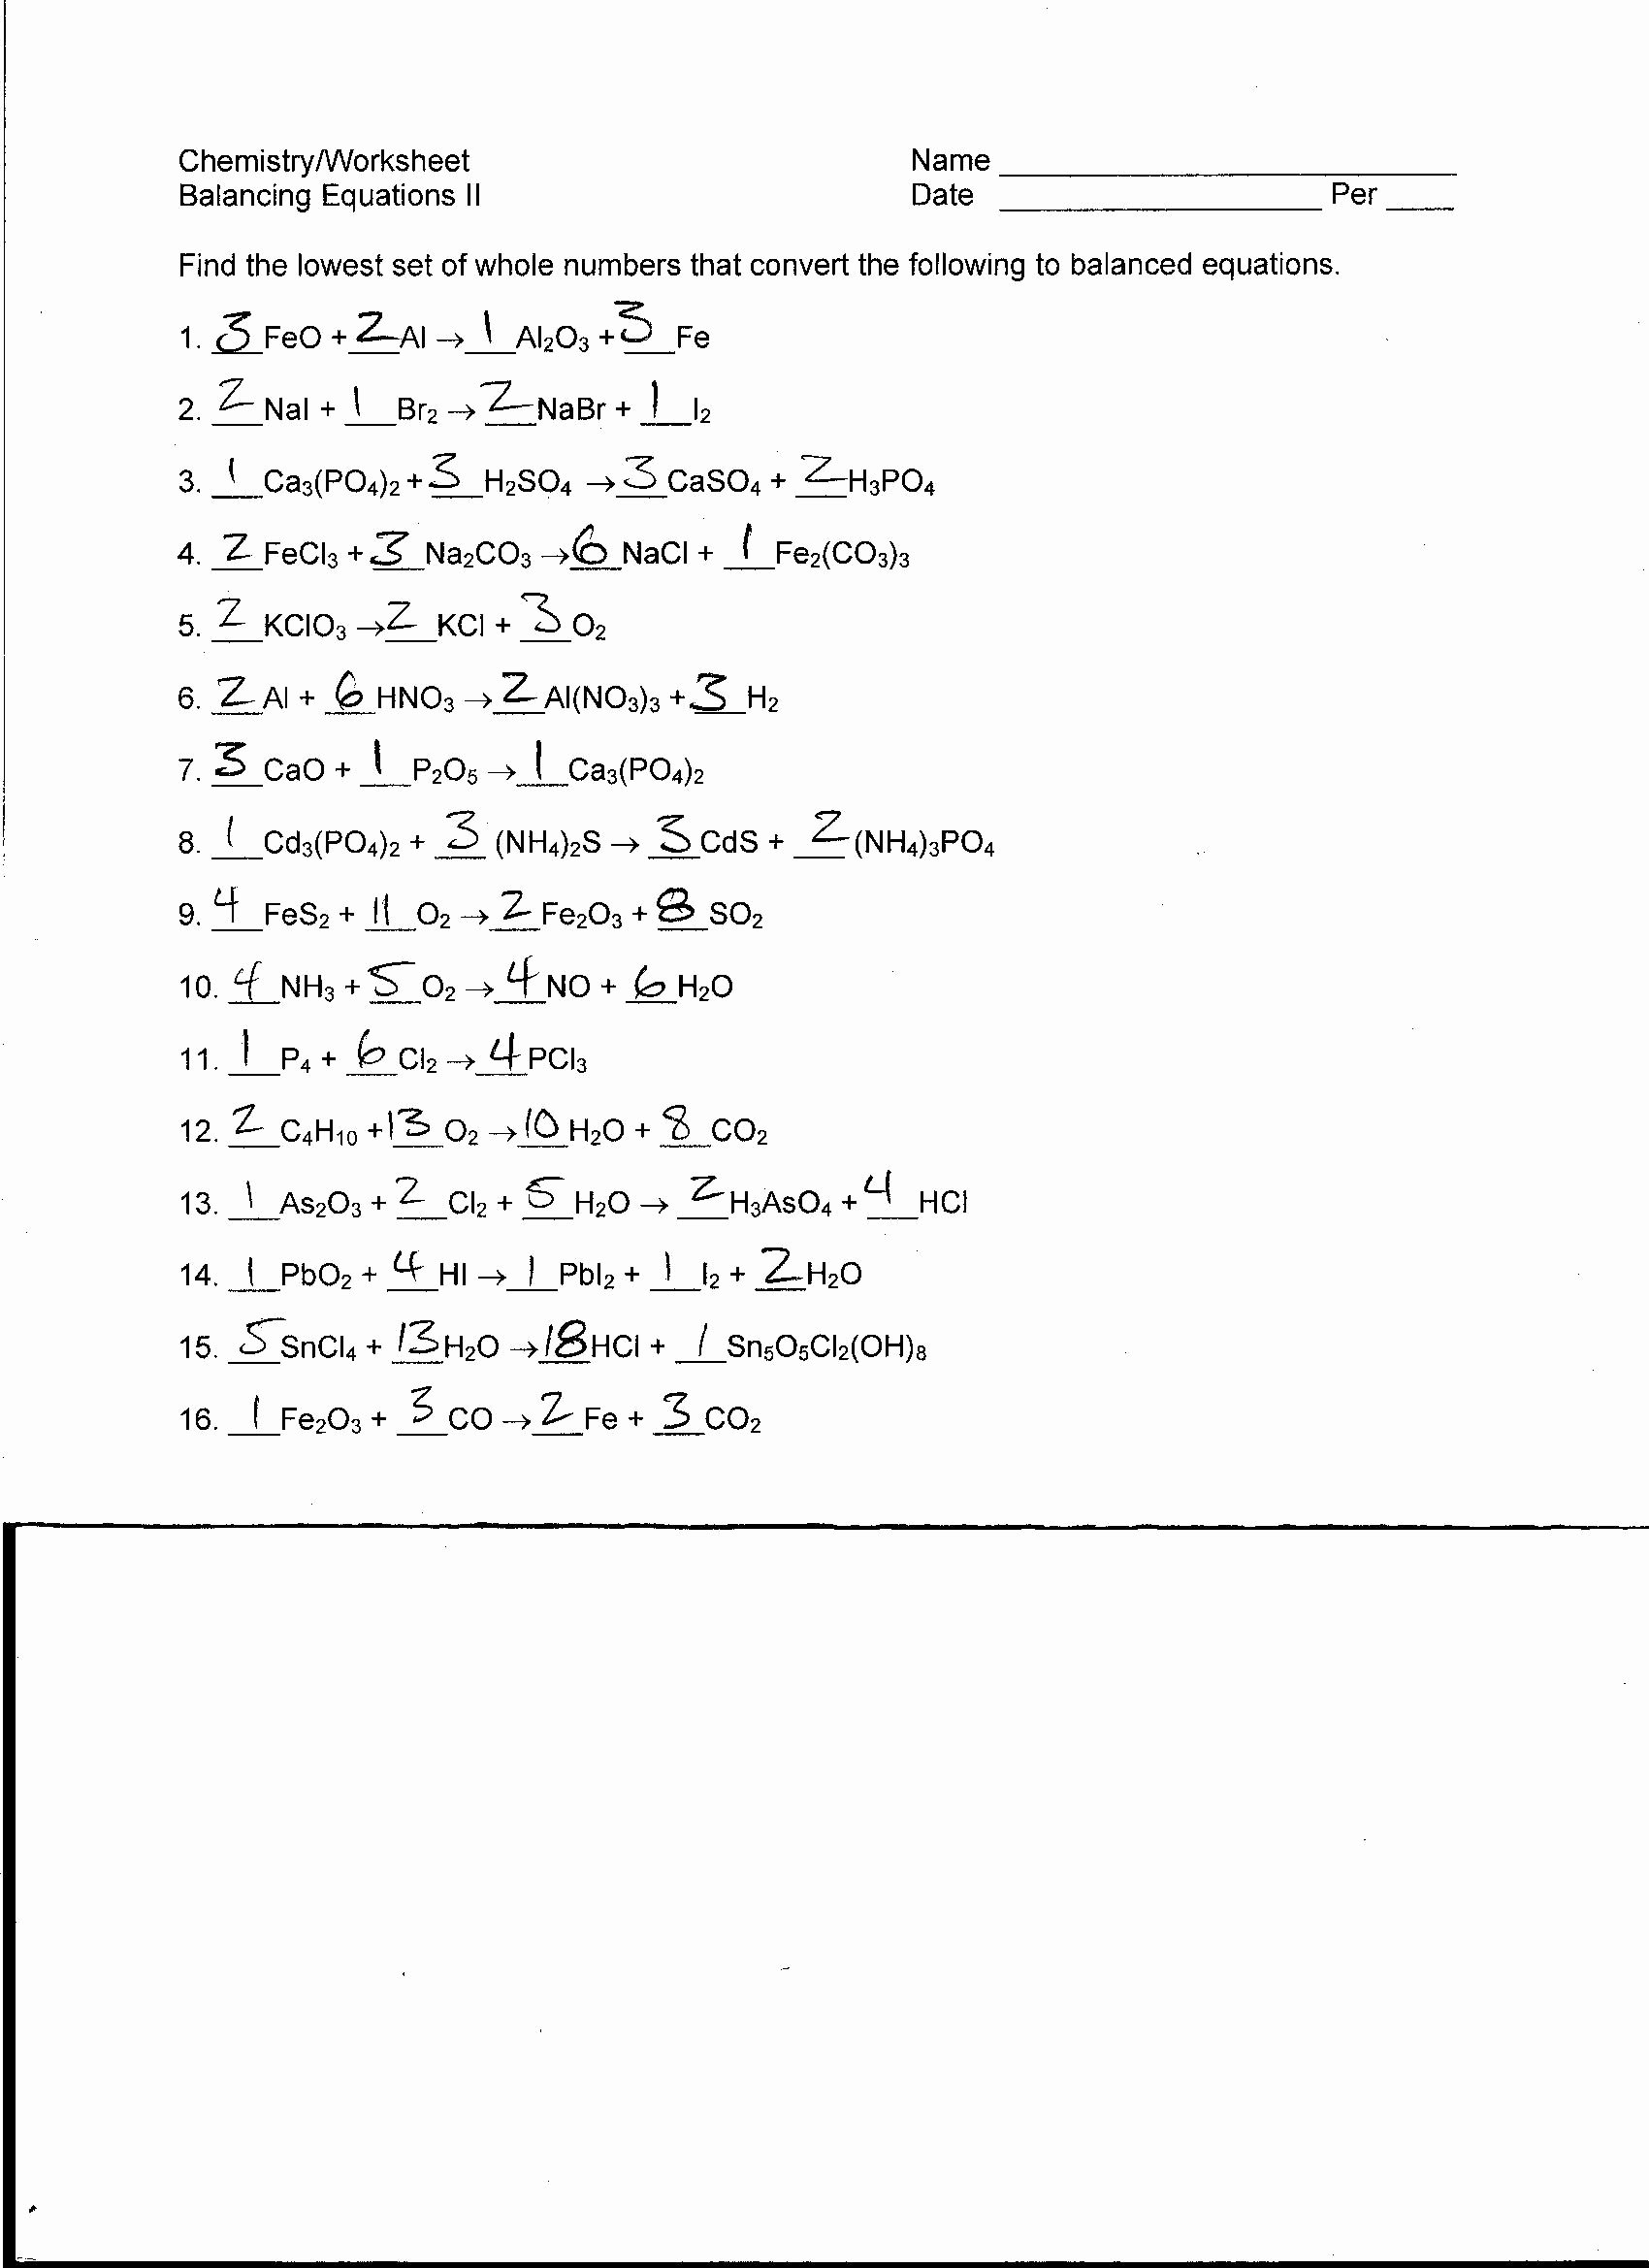 Balancing Equations Worksheet Answers Chemistry New Foothill High School